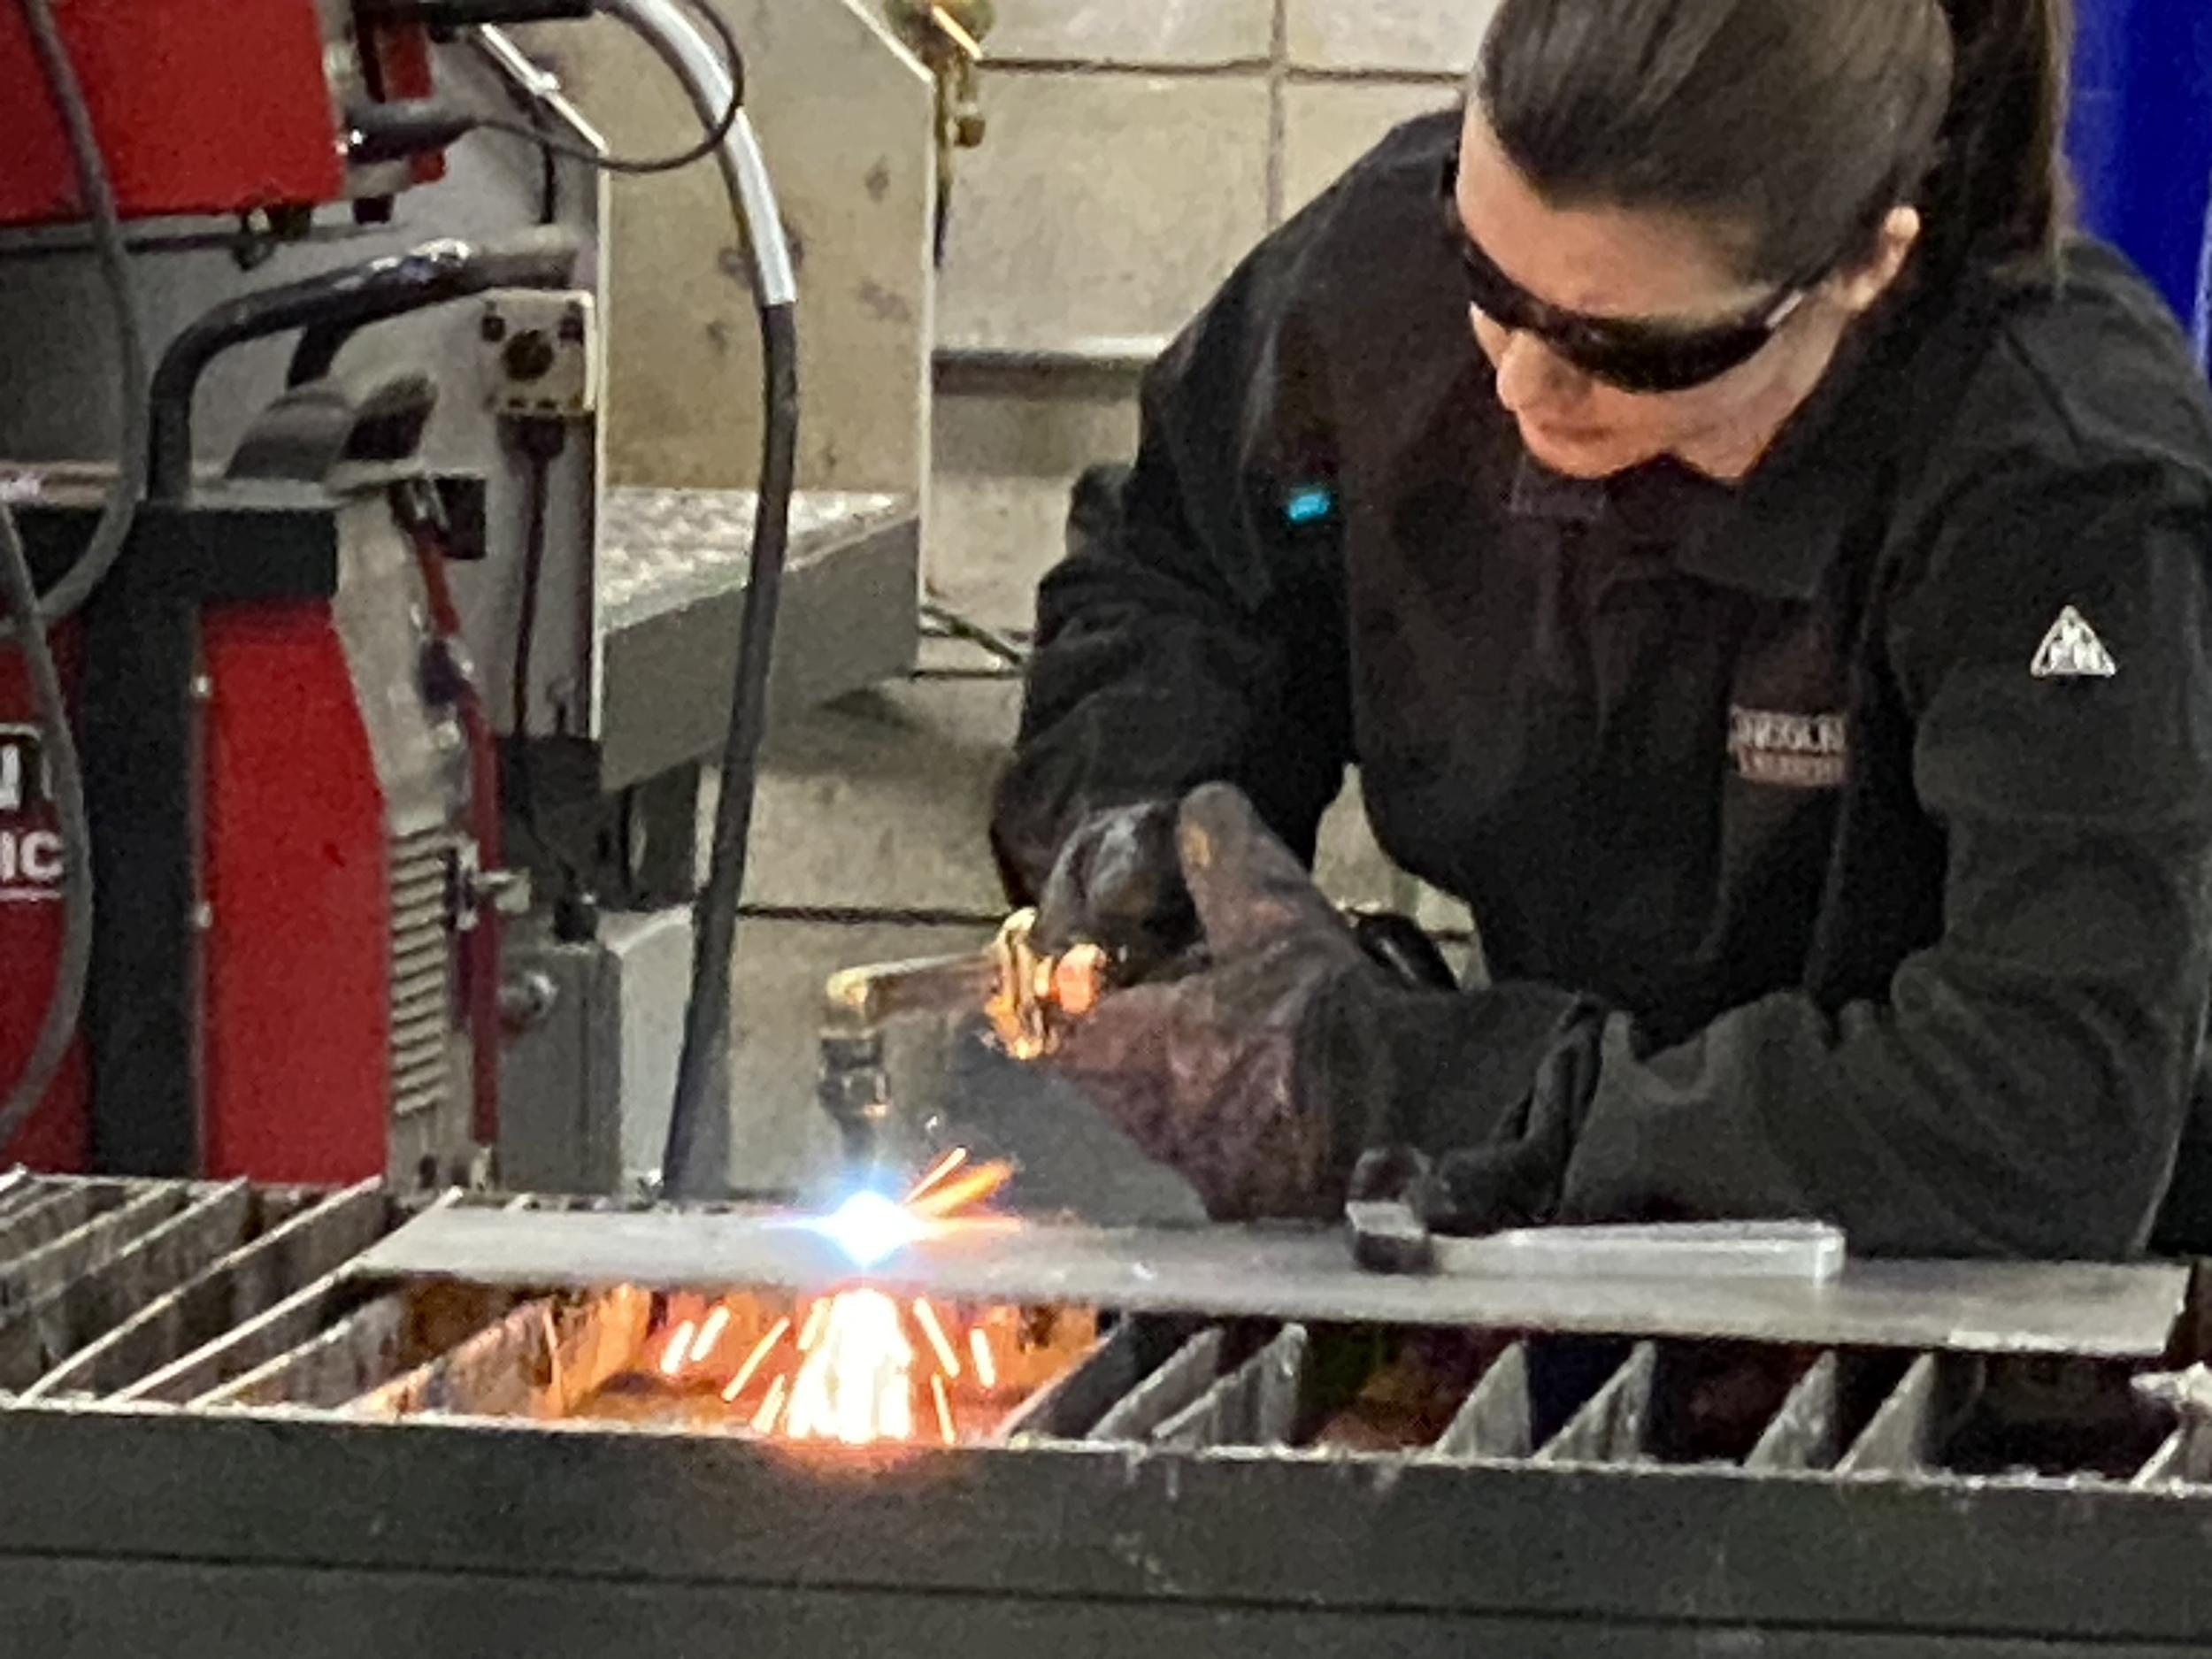 A person wearing safety goggles and gloves uses a torch to weld metal.